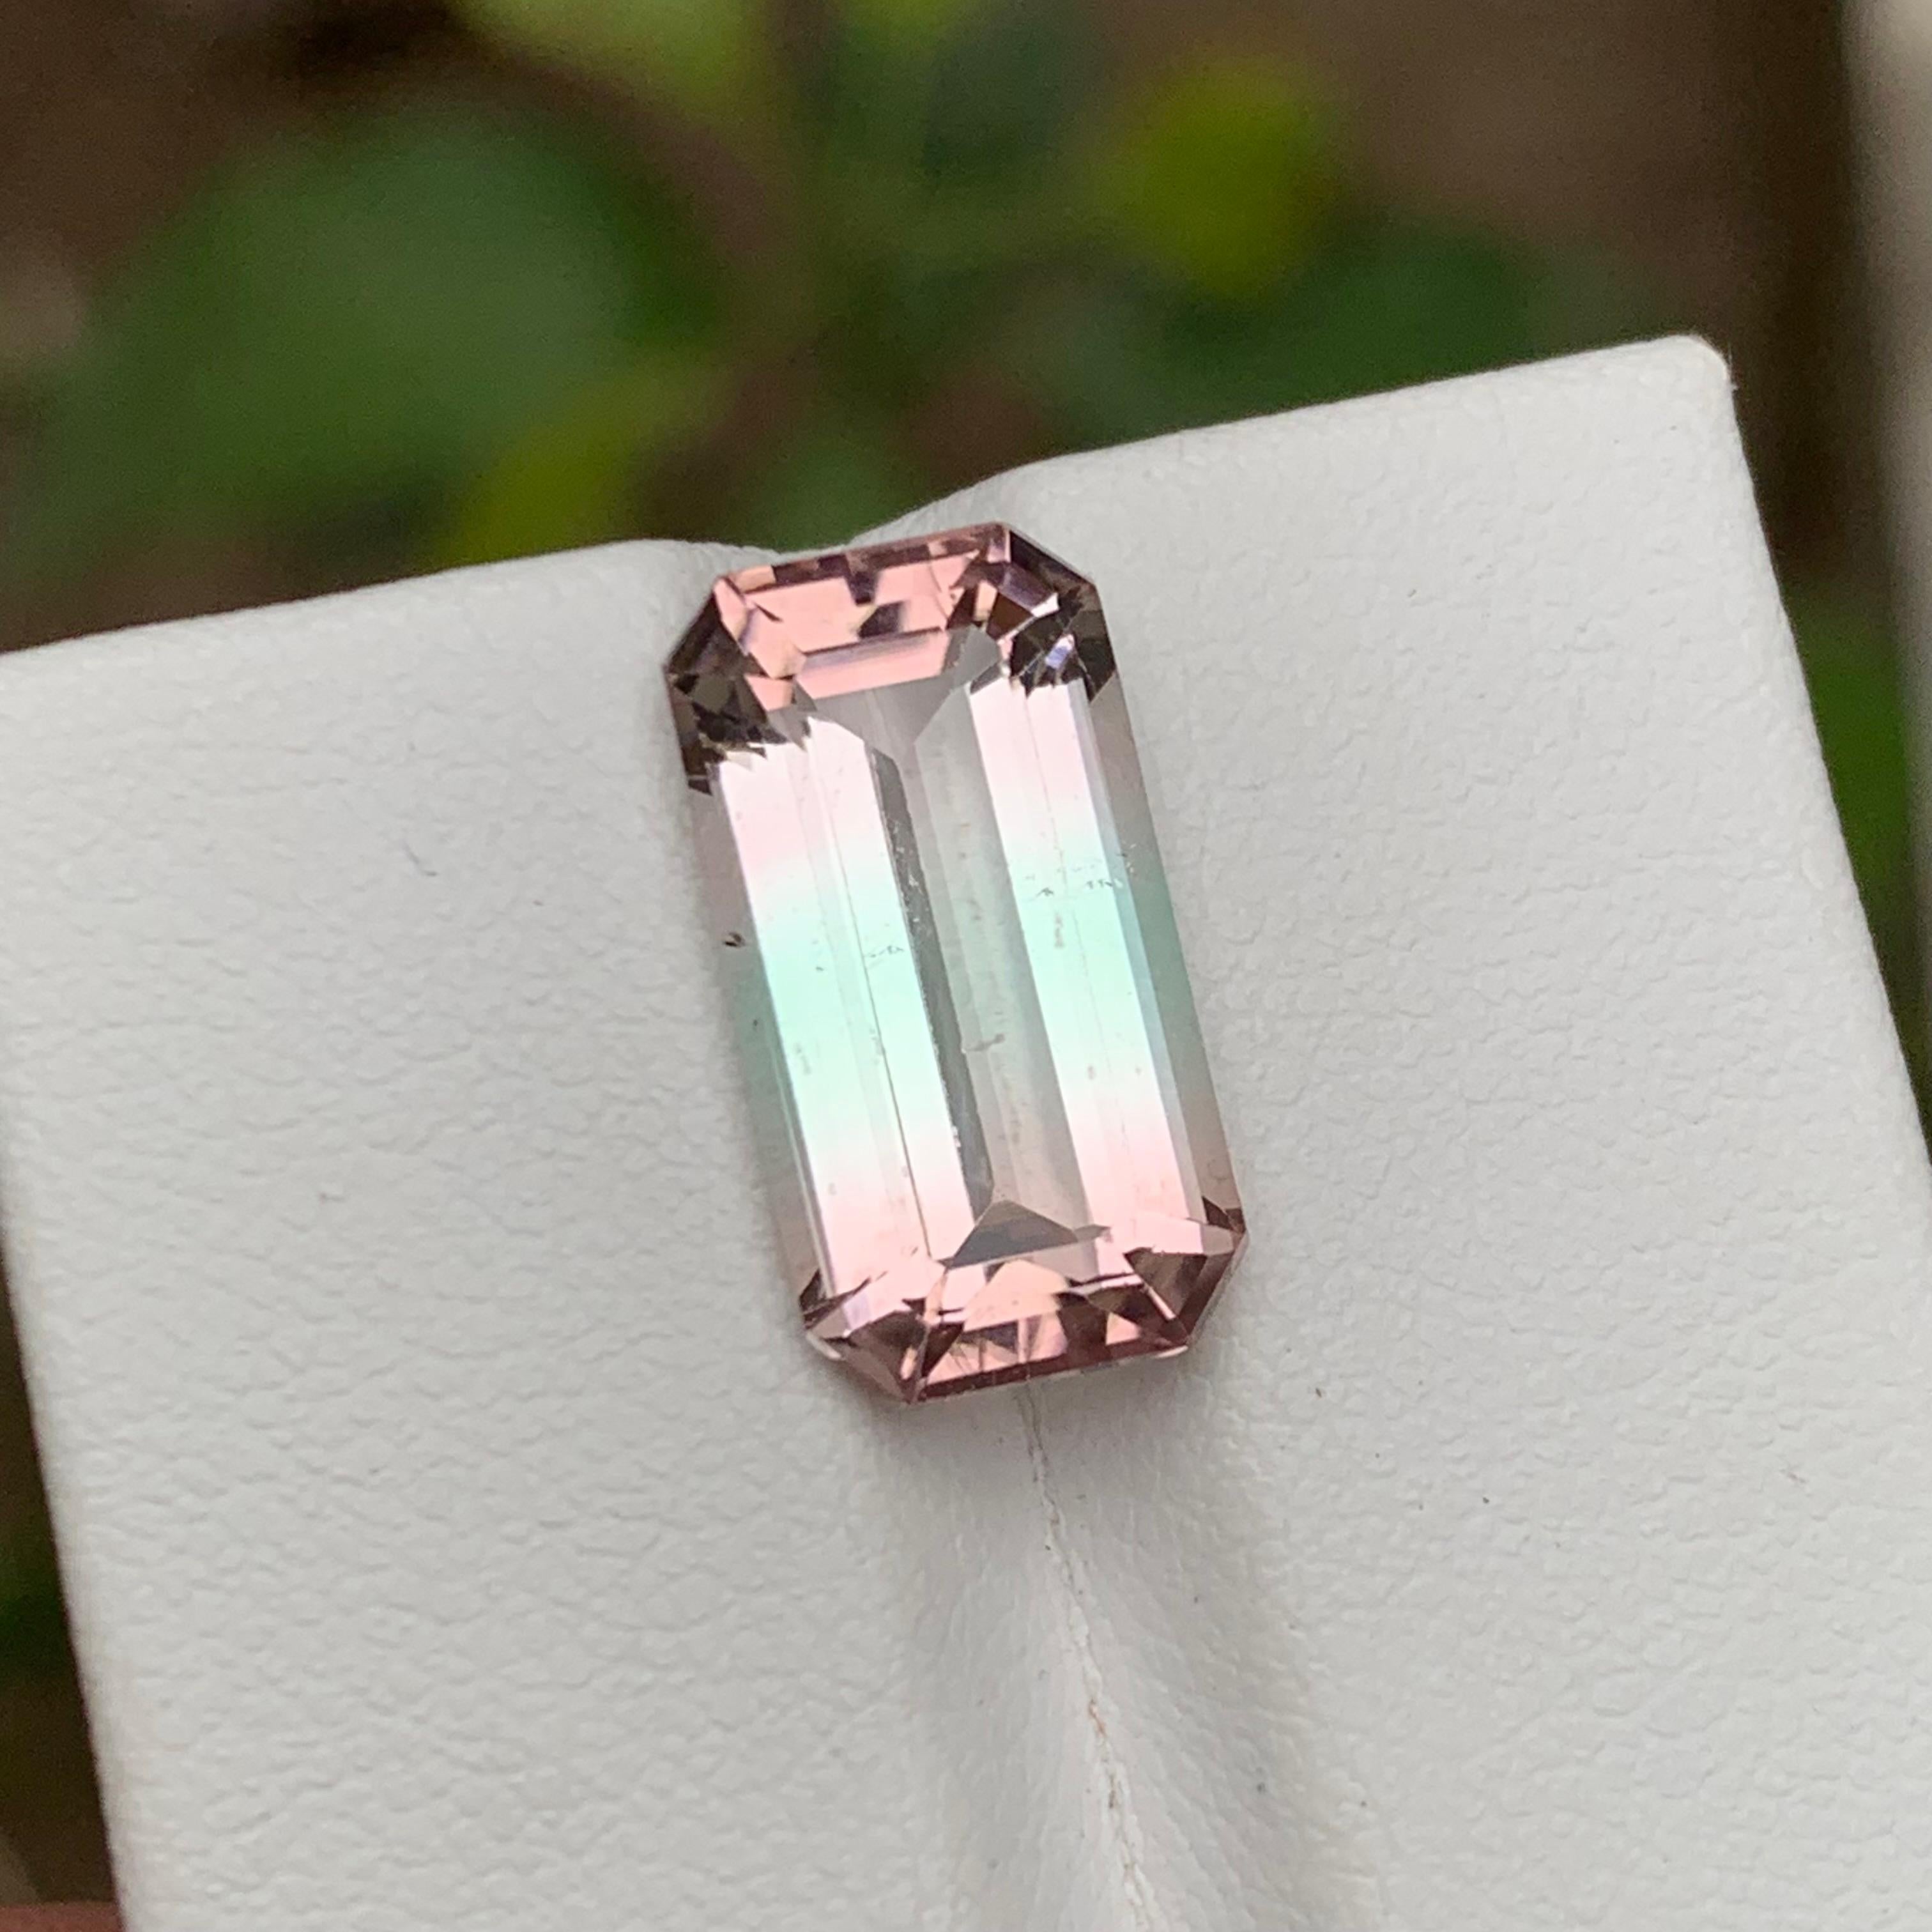 Rare Bicolor Natural Tourmaline Gemstone, 7 Ct Step Emerald Cut for Pendant/Ring For Sale 4